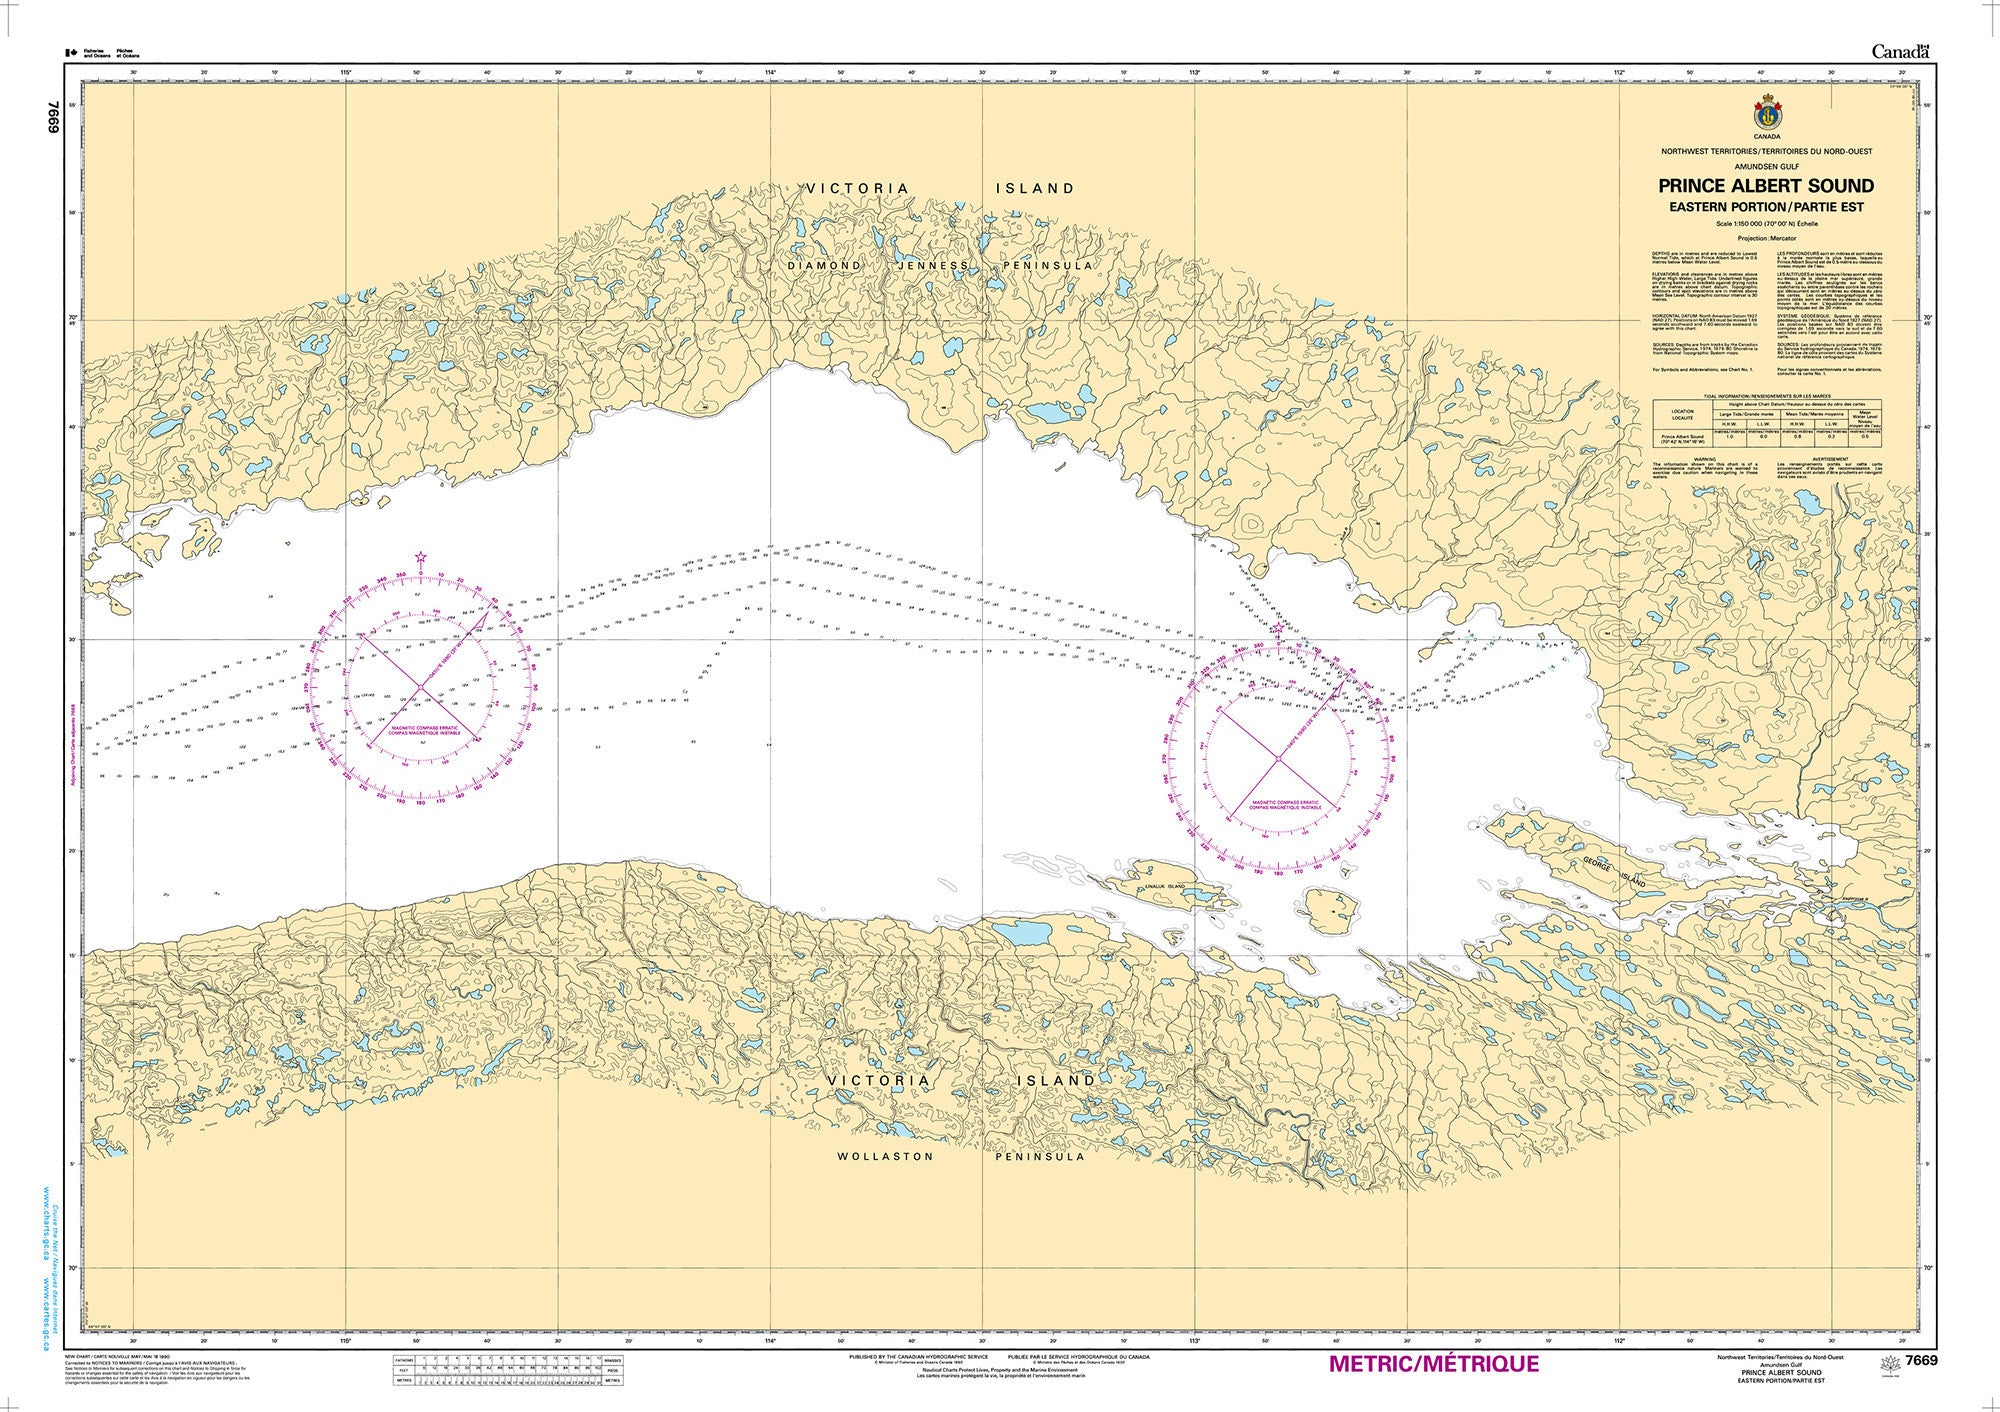 Canadian Hydrographic Service Nautical Chart CHS7669: Prince Albert Sound Eastern Portion/Partie Est